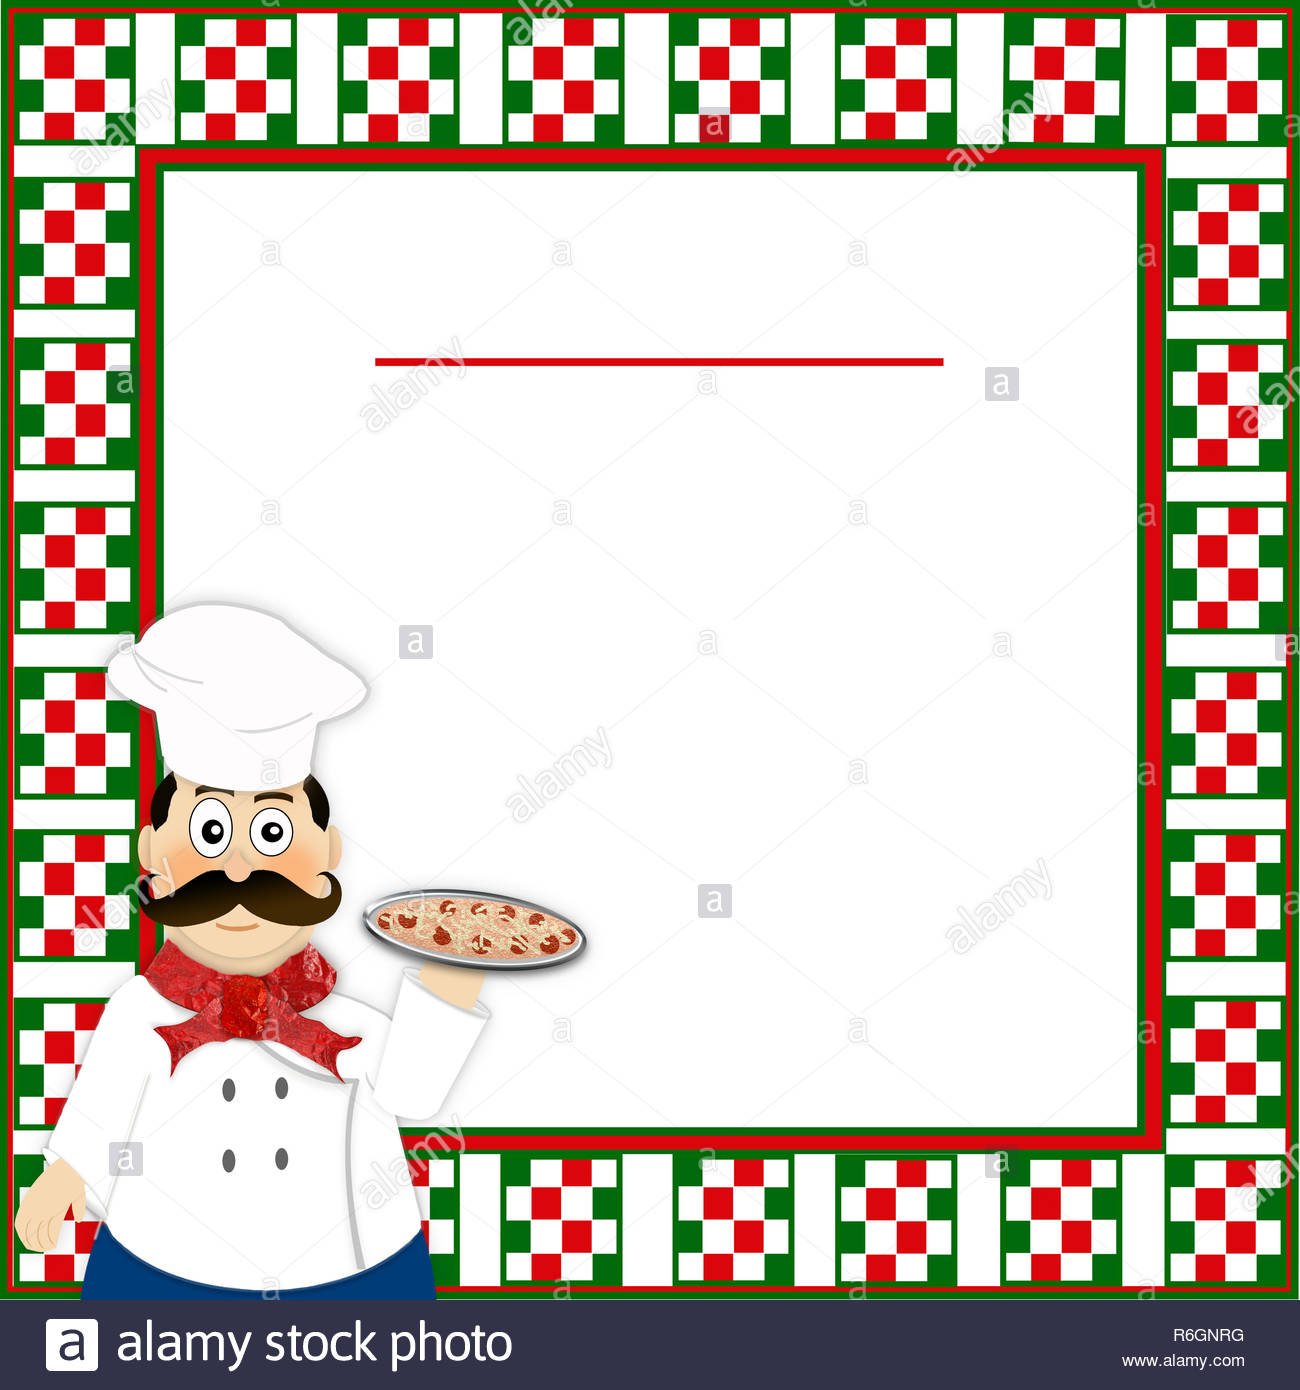 Italian backgrounds with a red green and white checkered border